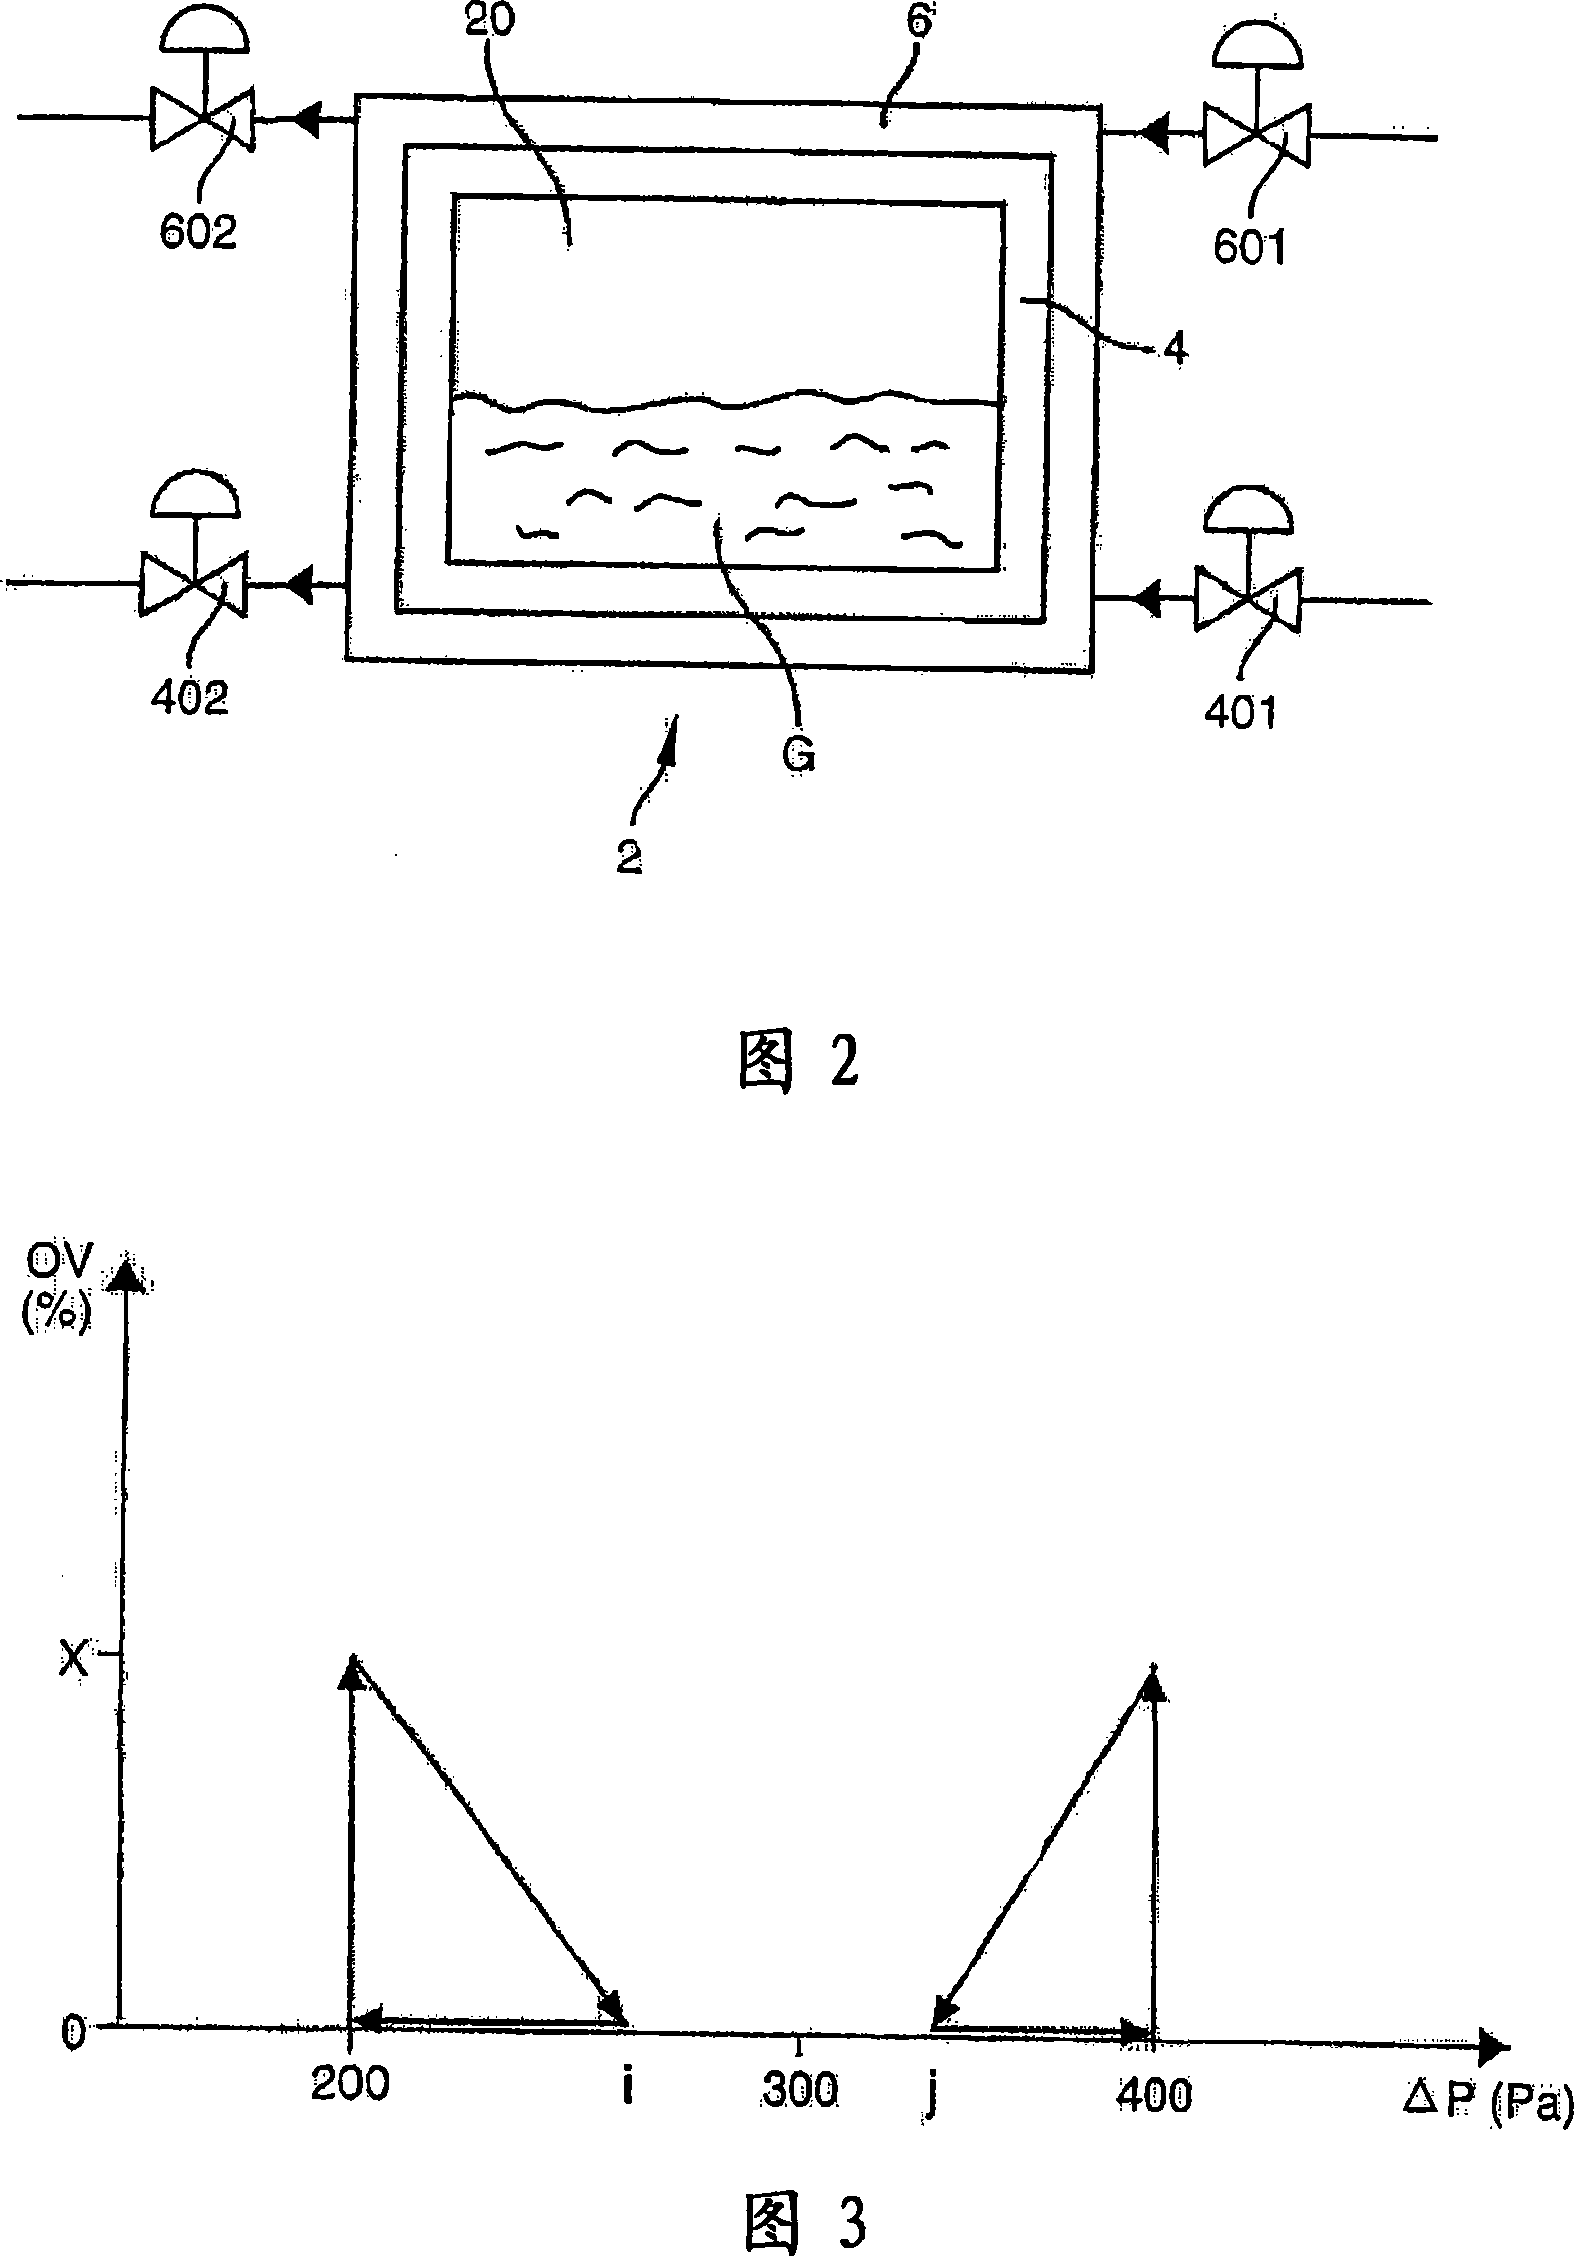 Method for measuring the actual porosity of the watertightness barrier of a fluid containment tank